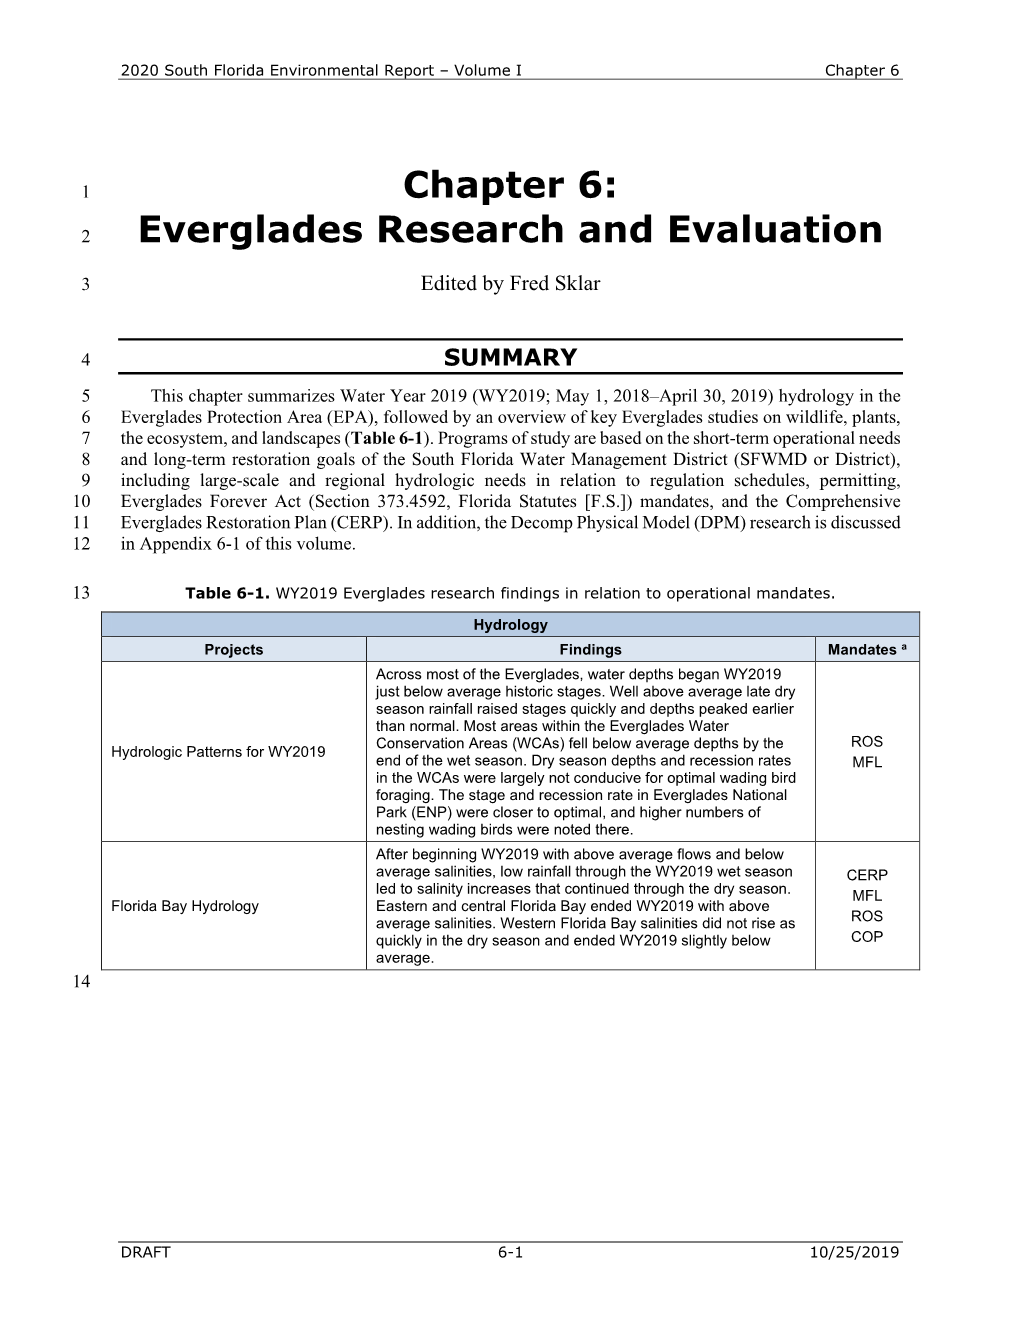 Chapter 6: Everglades Research and Evaluation